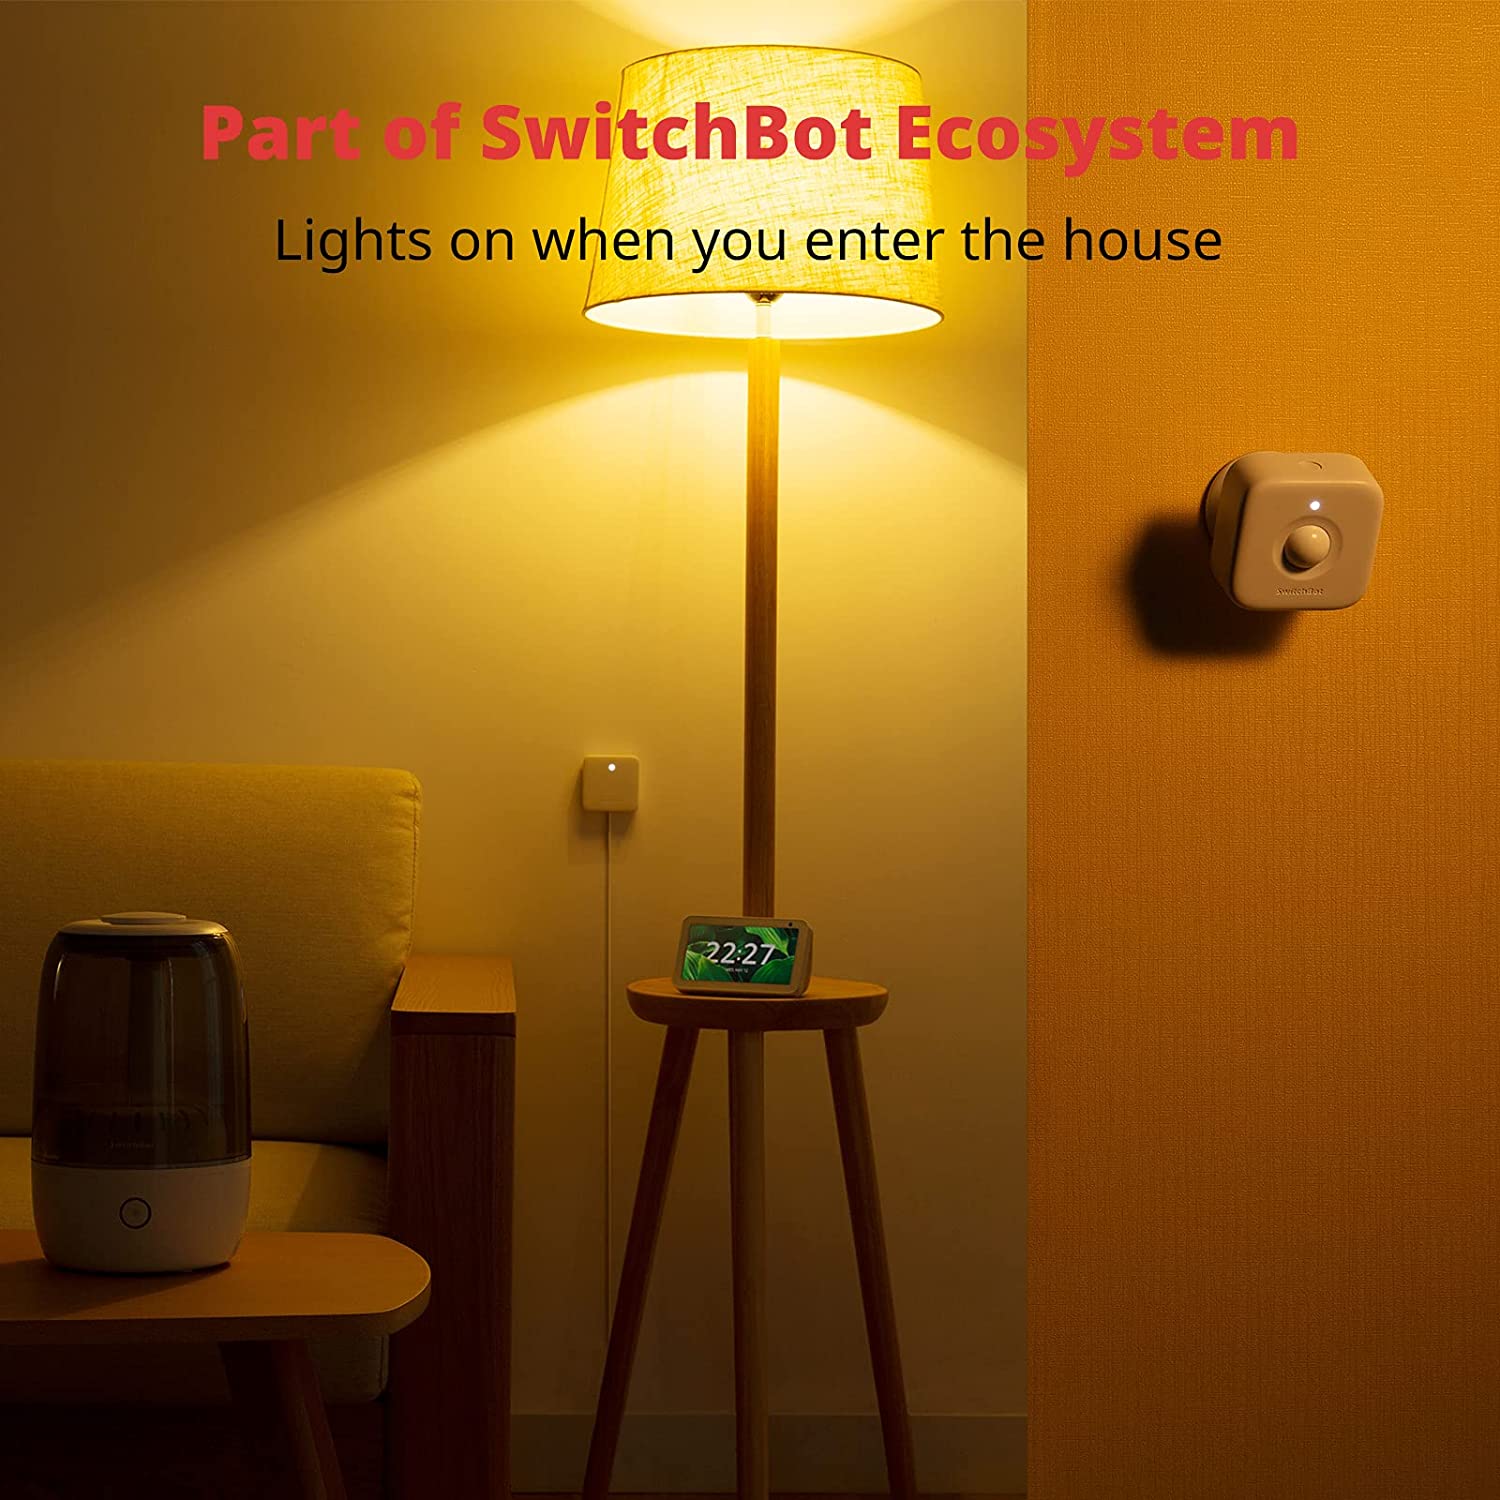 SwitchBot Motion Sensor | Wireless Home Security System, PIR Motion Detector Alert, Add SwitchBot Hub Mini to Make it Compatible with Alexa